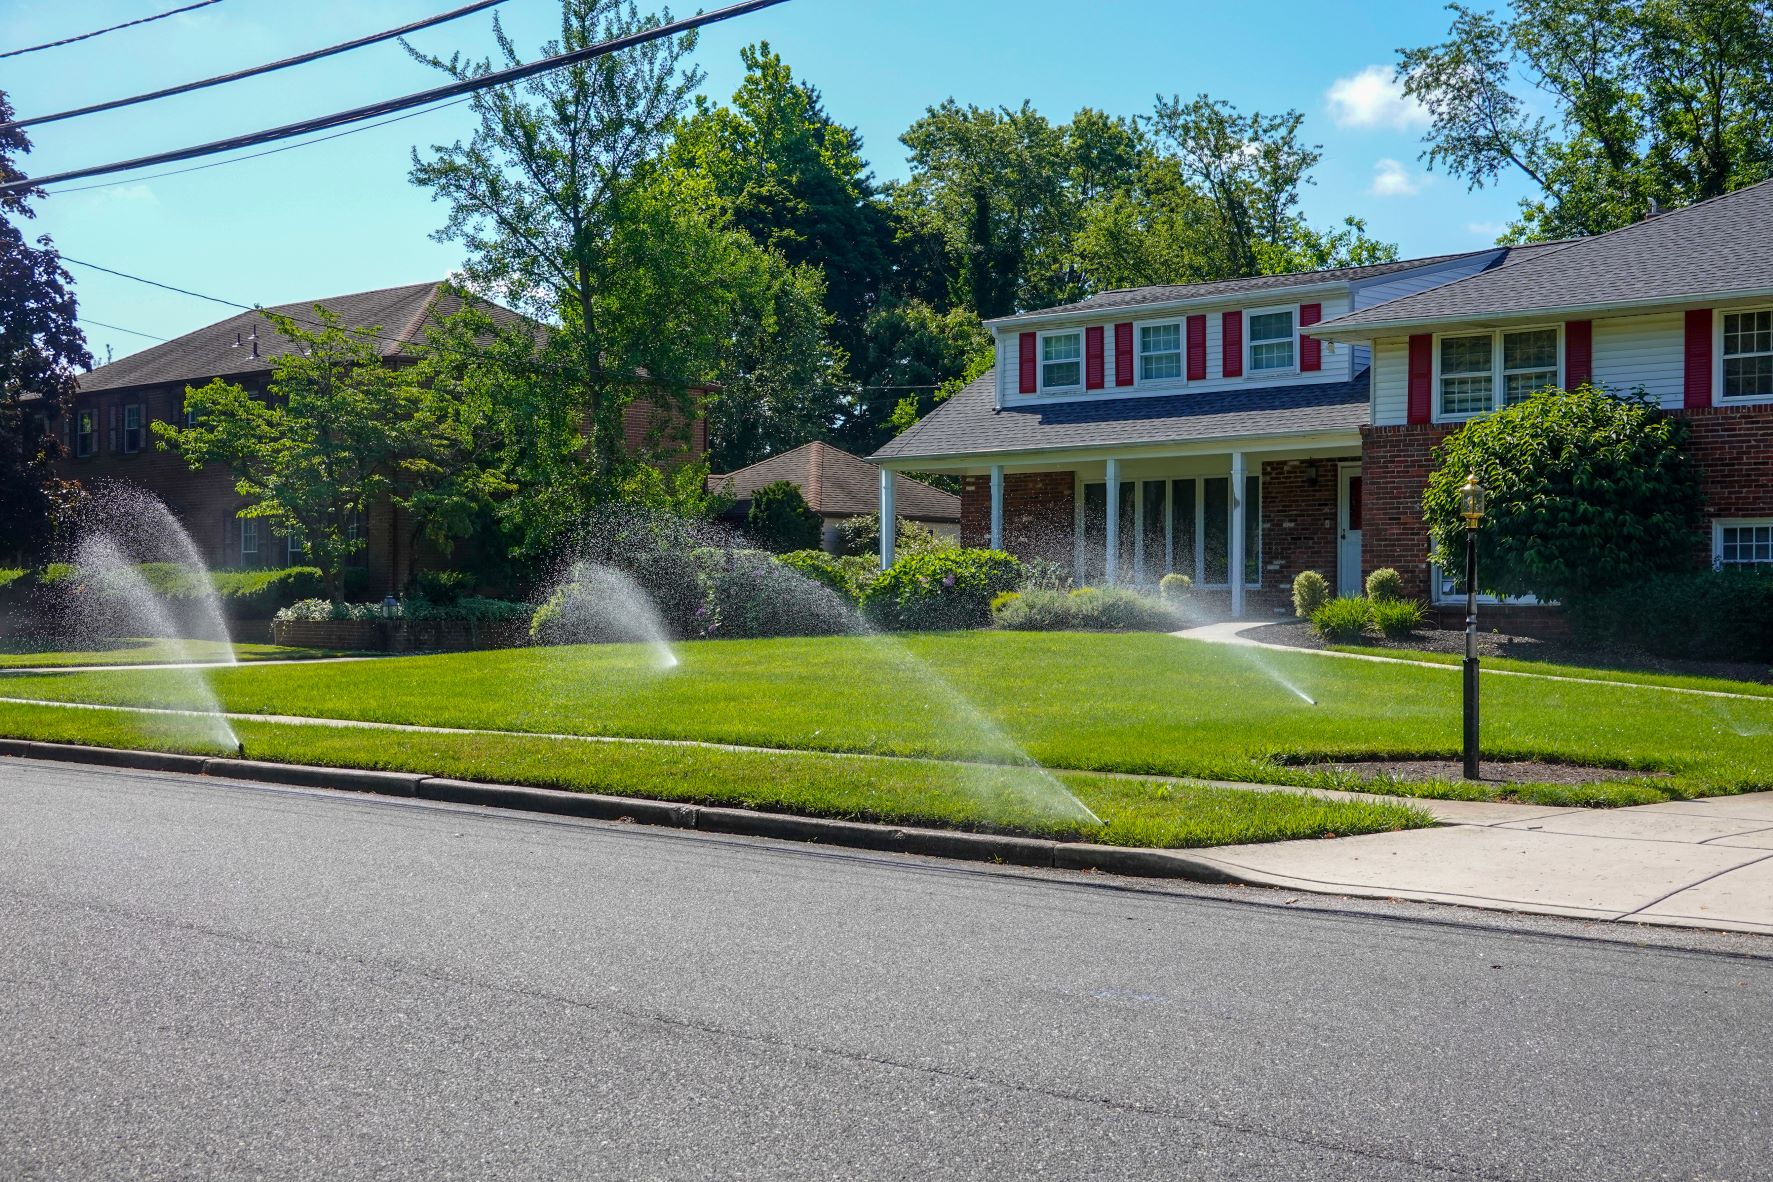 Two story brick house with multiple sprinklers spraying the yard.